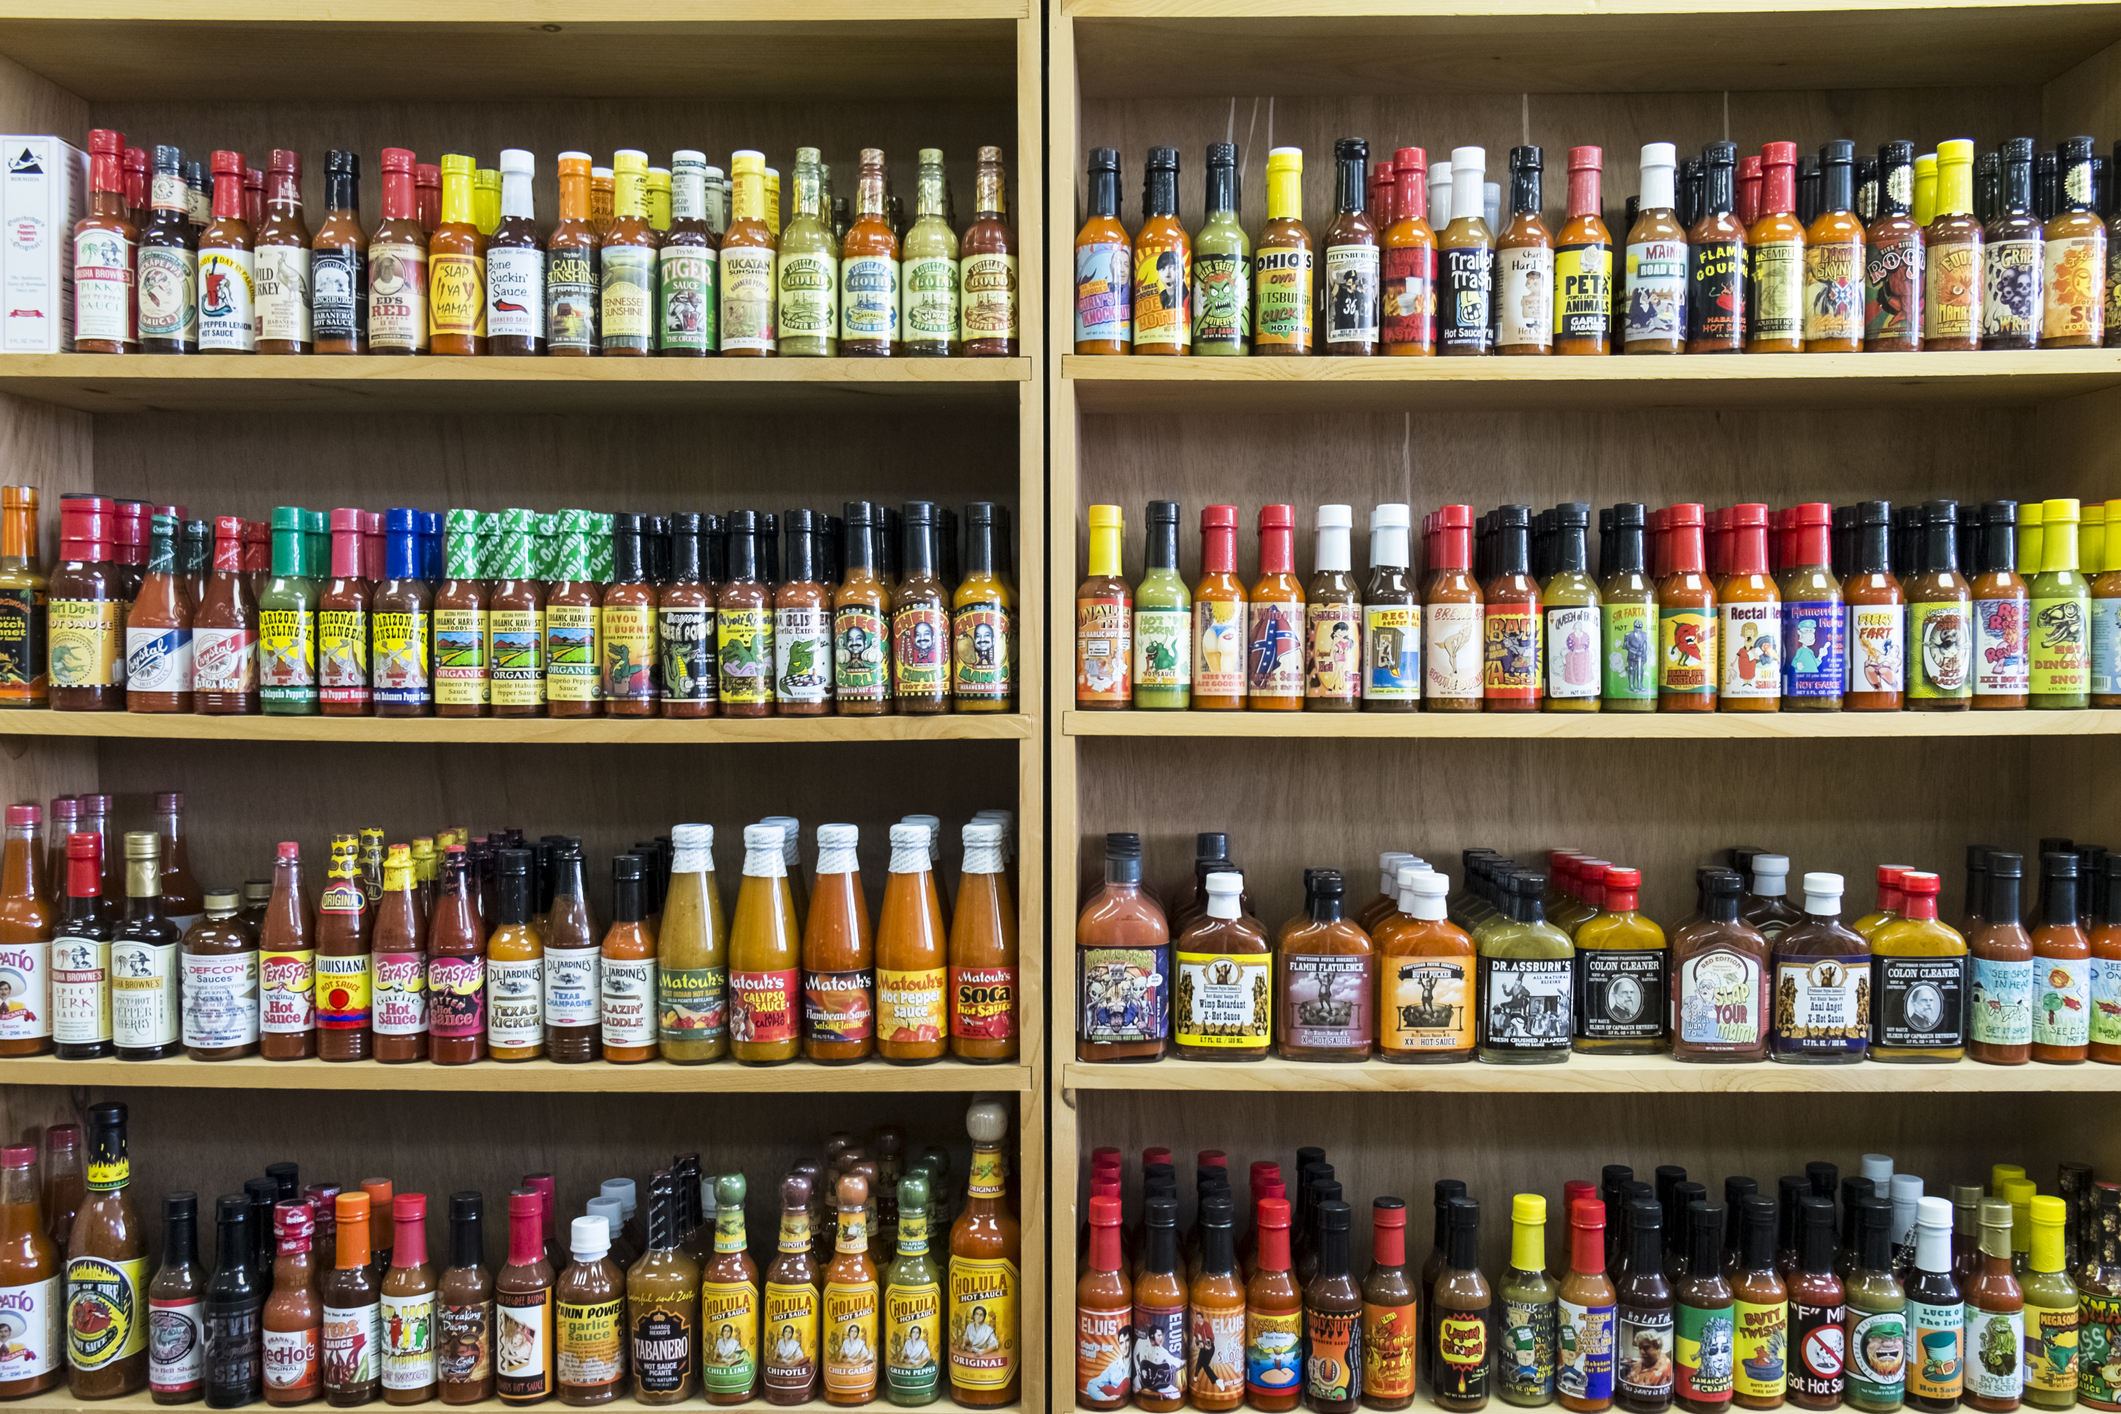 shelves lined with sauces